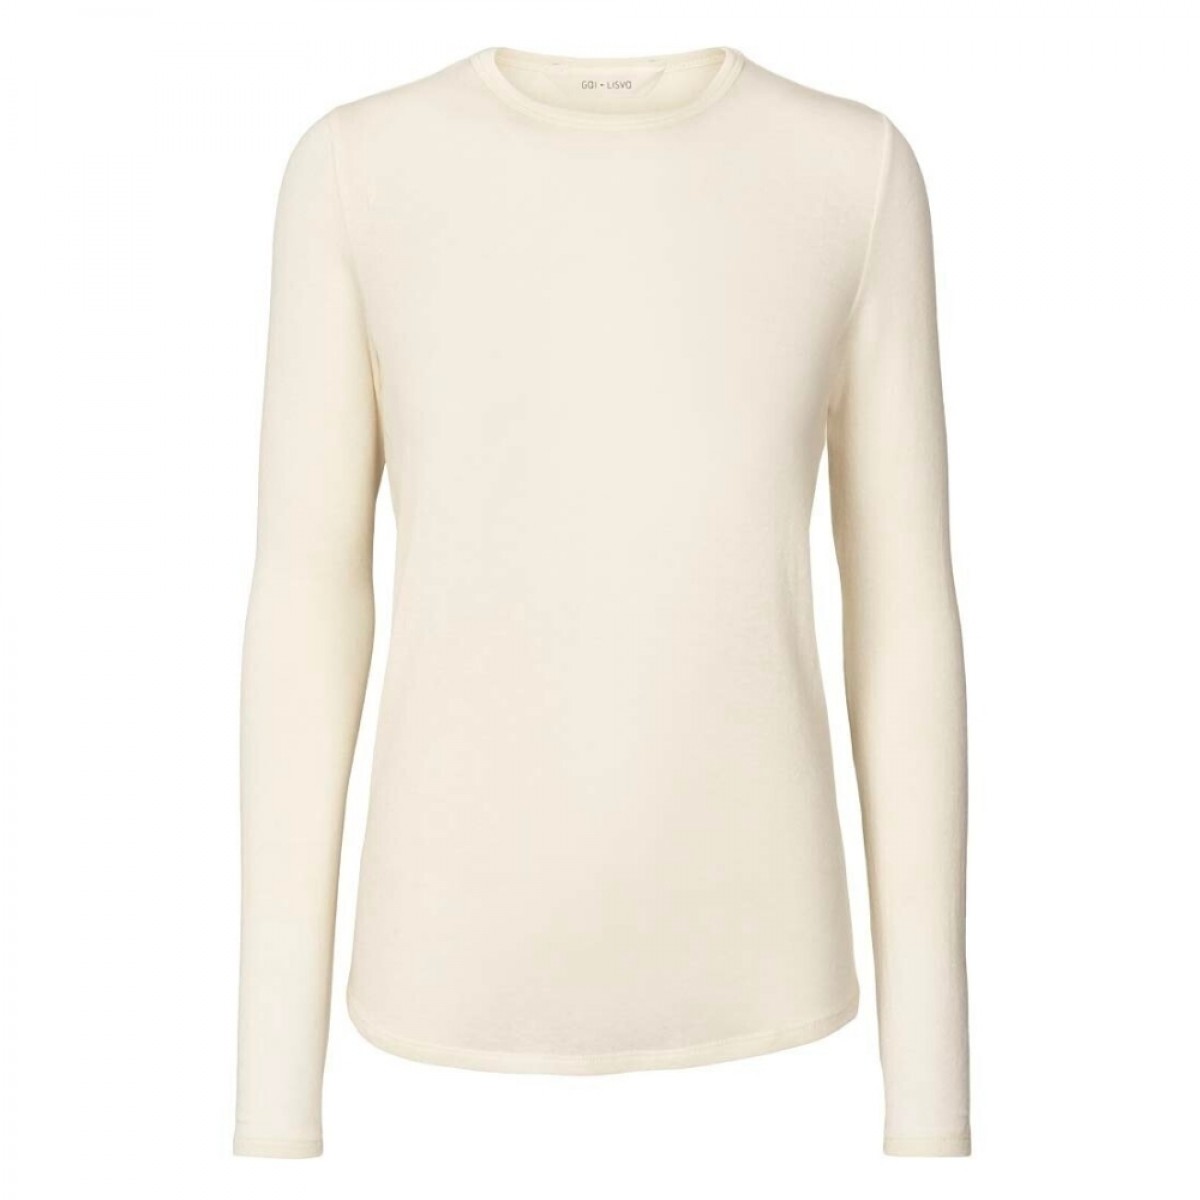 thyra wool top - off white - front